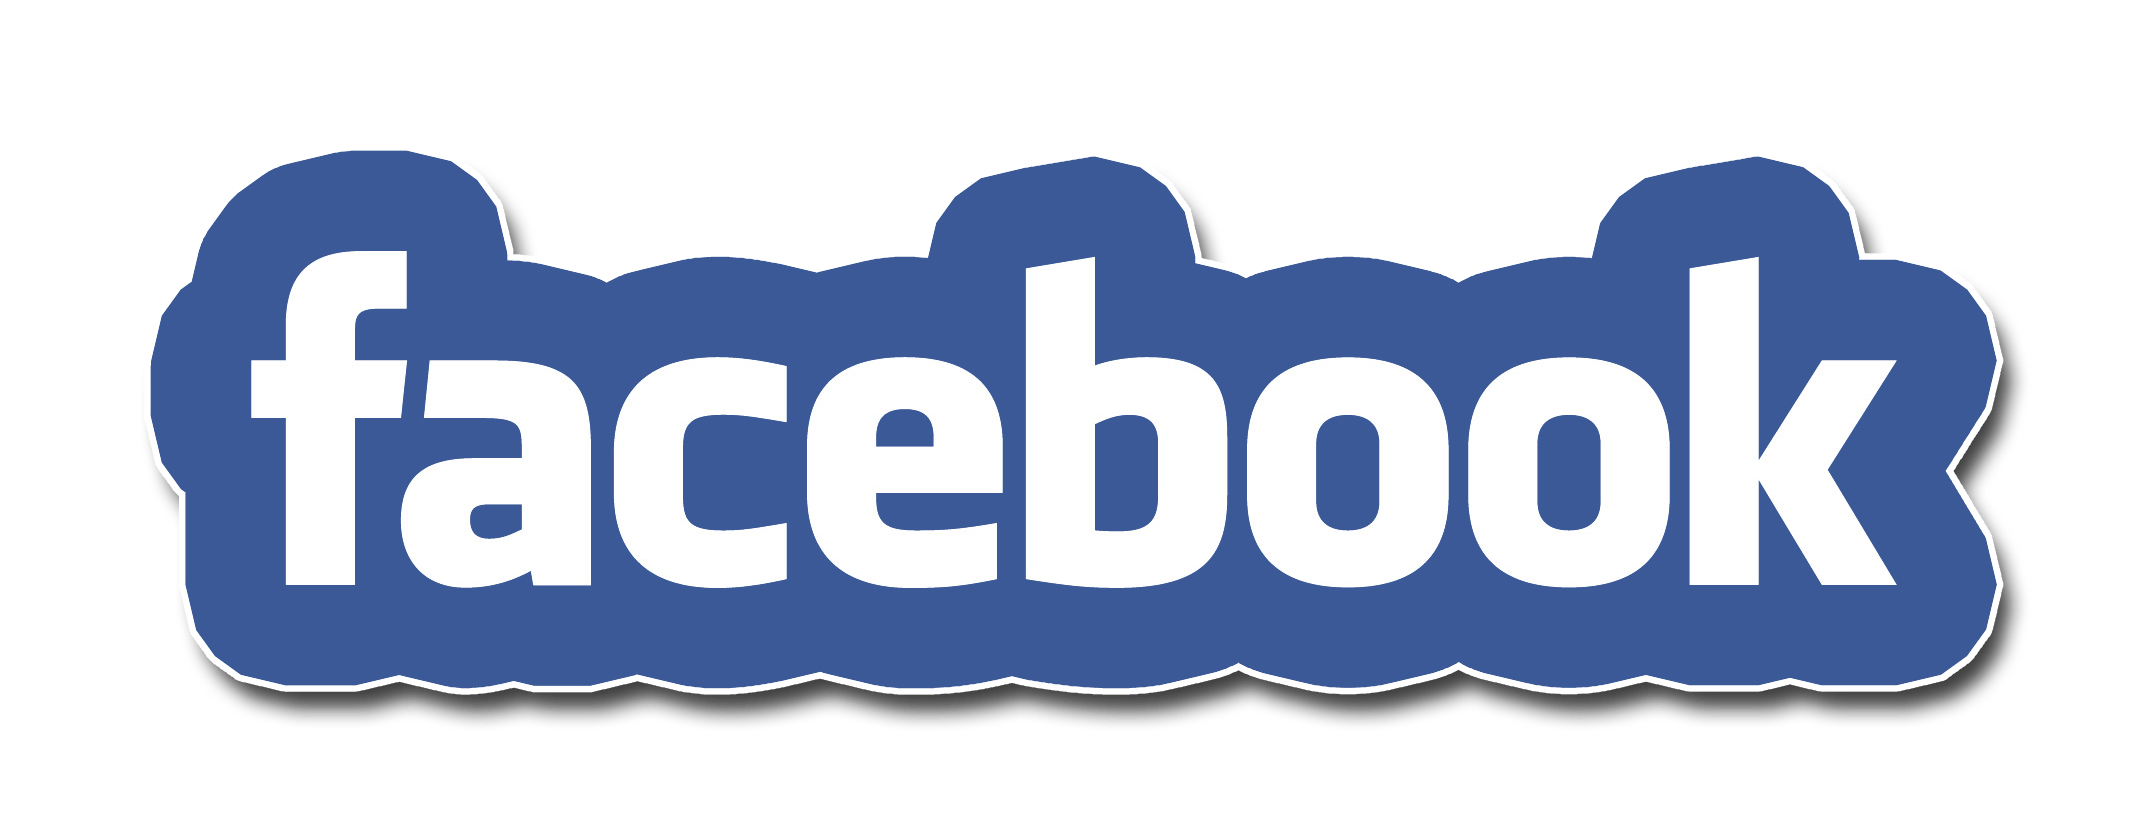 Facebook New Word Logo - Facebook Logo Transparent PNG Pictures - Free Icons and PNG Backgrounds